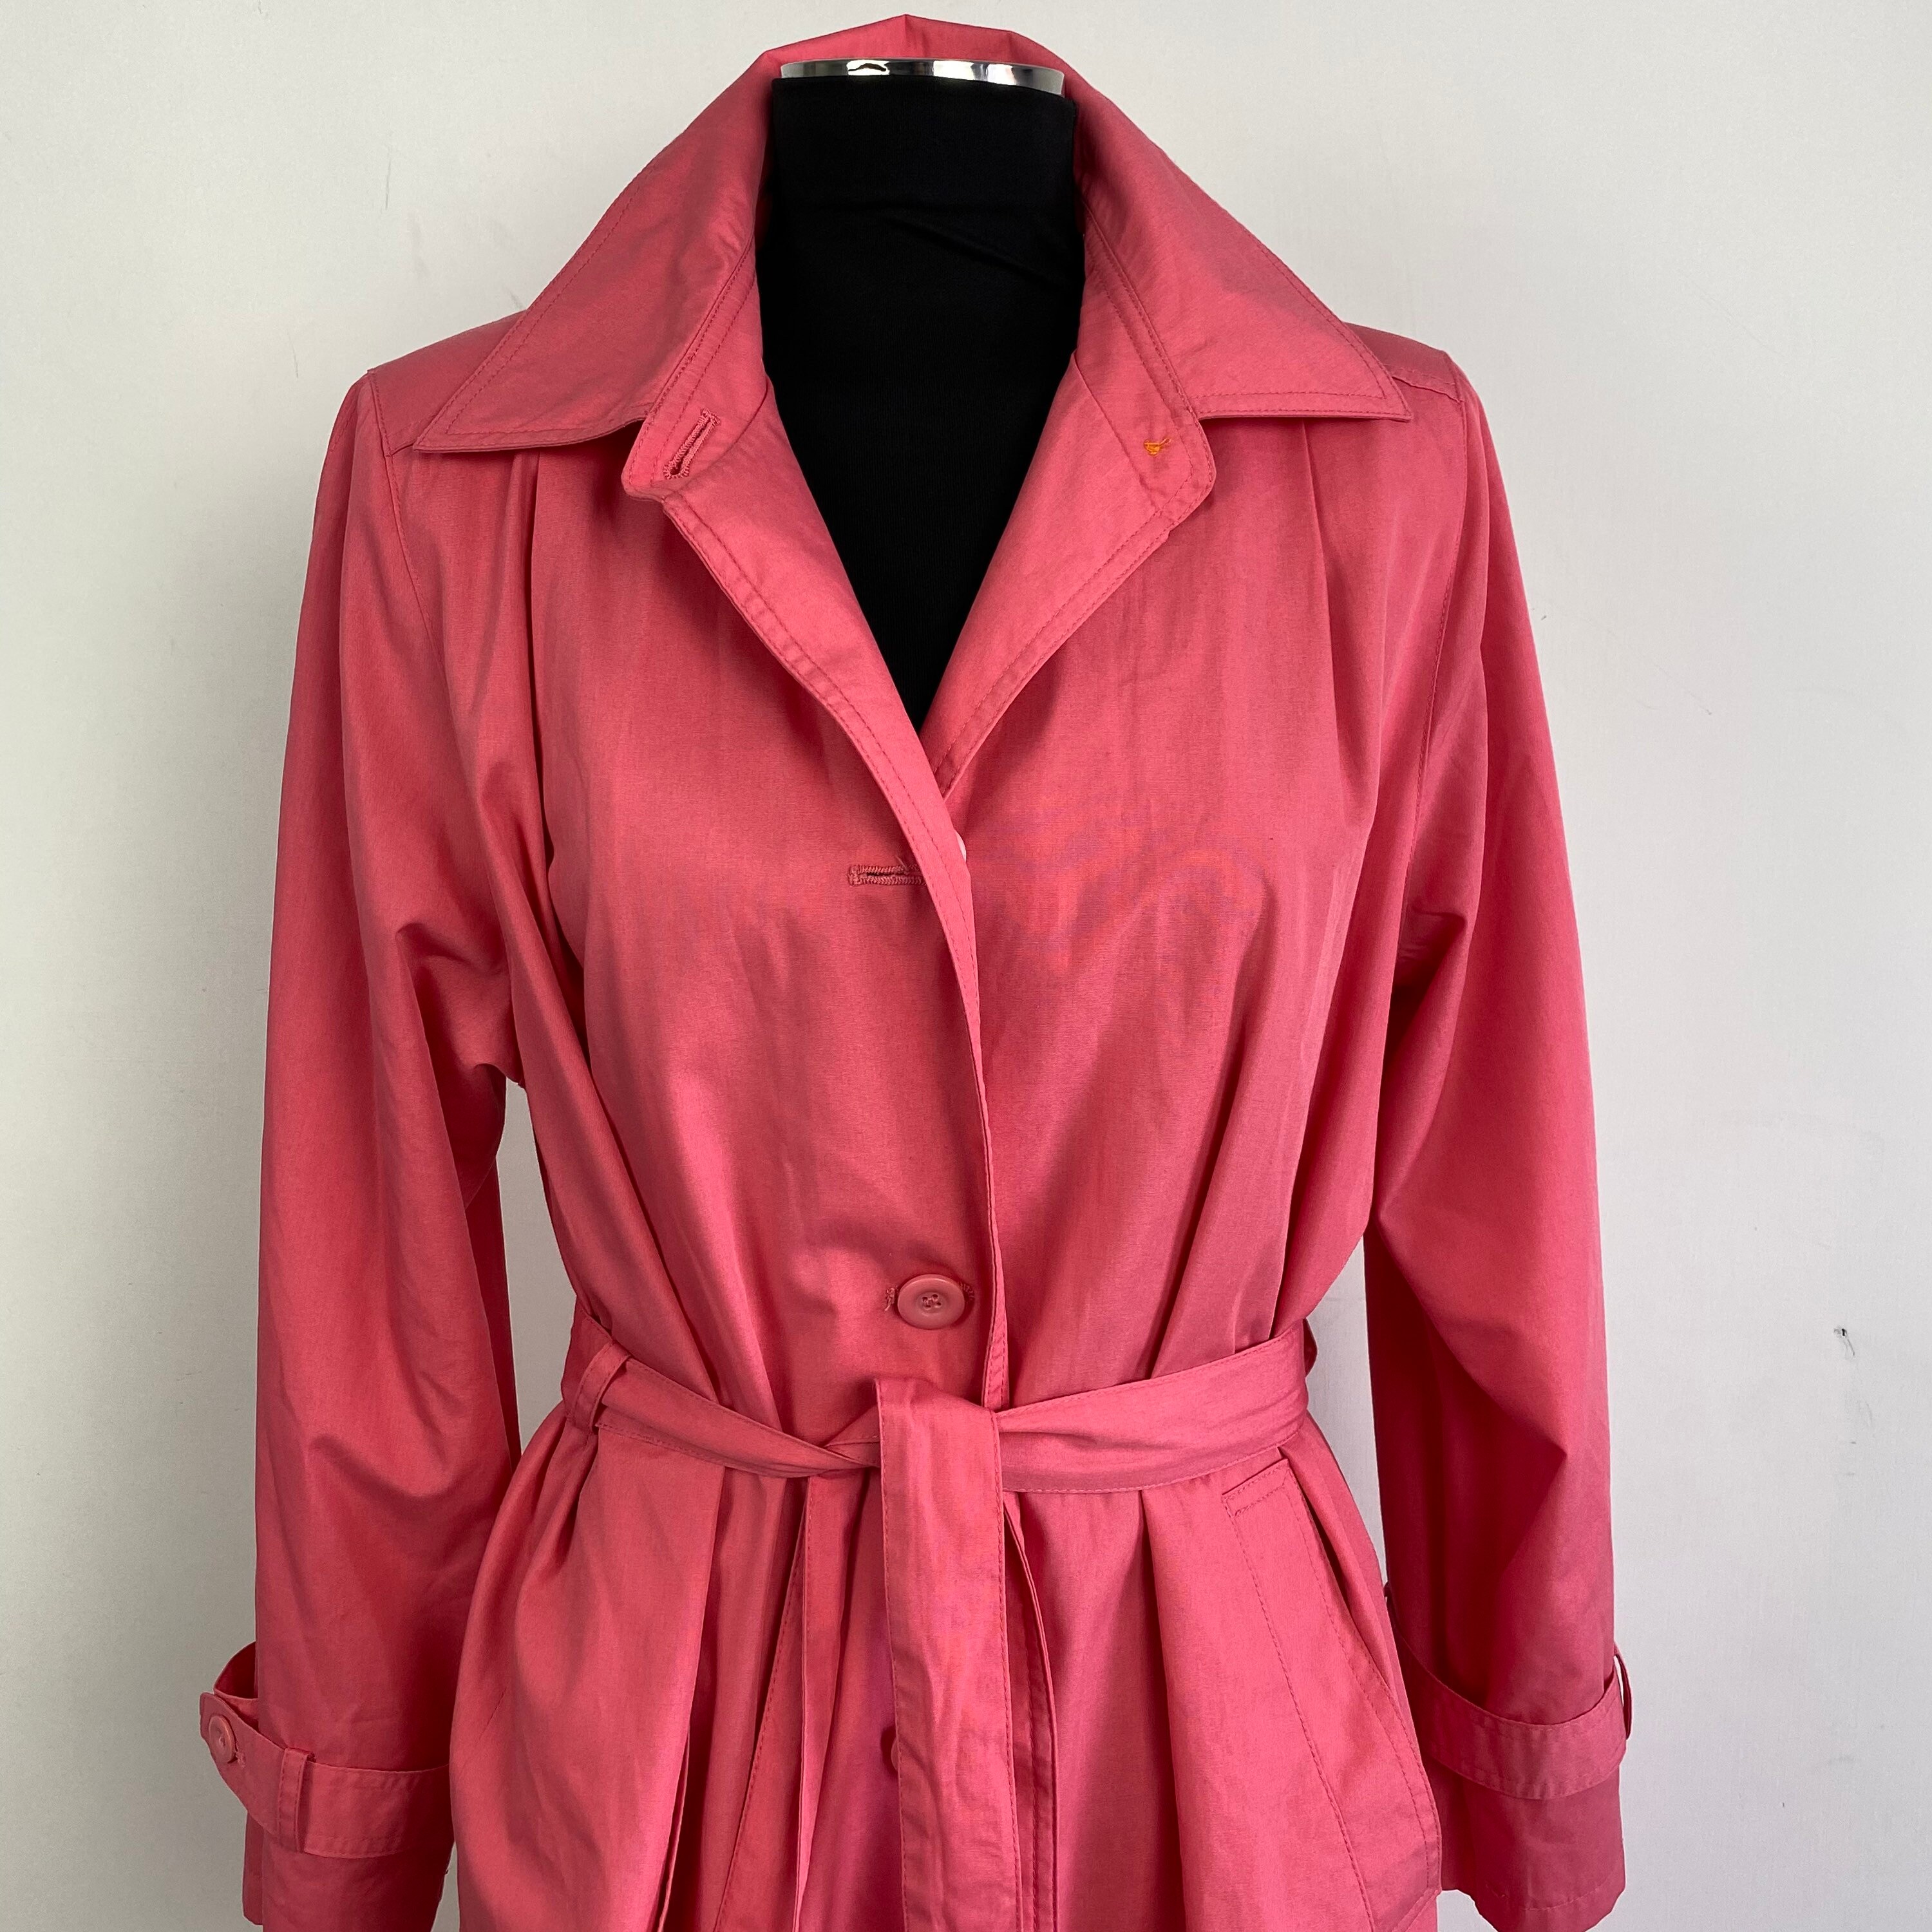 Vintage 90s Pink Trench Coat Long Trench Coat Belted Coat - Etsy